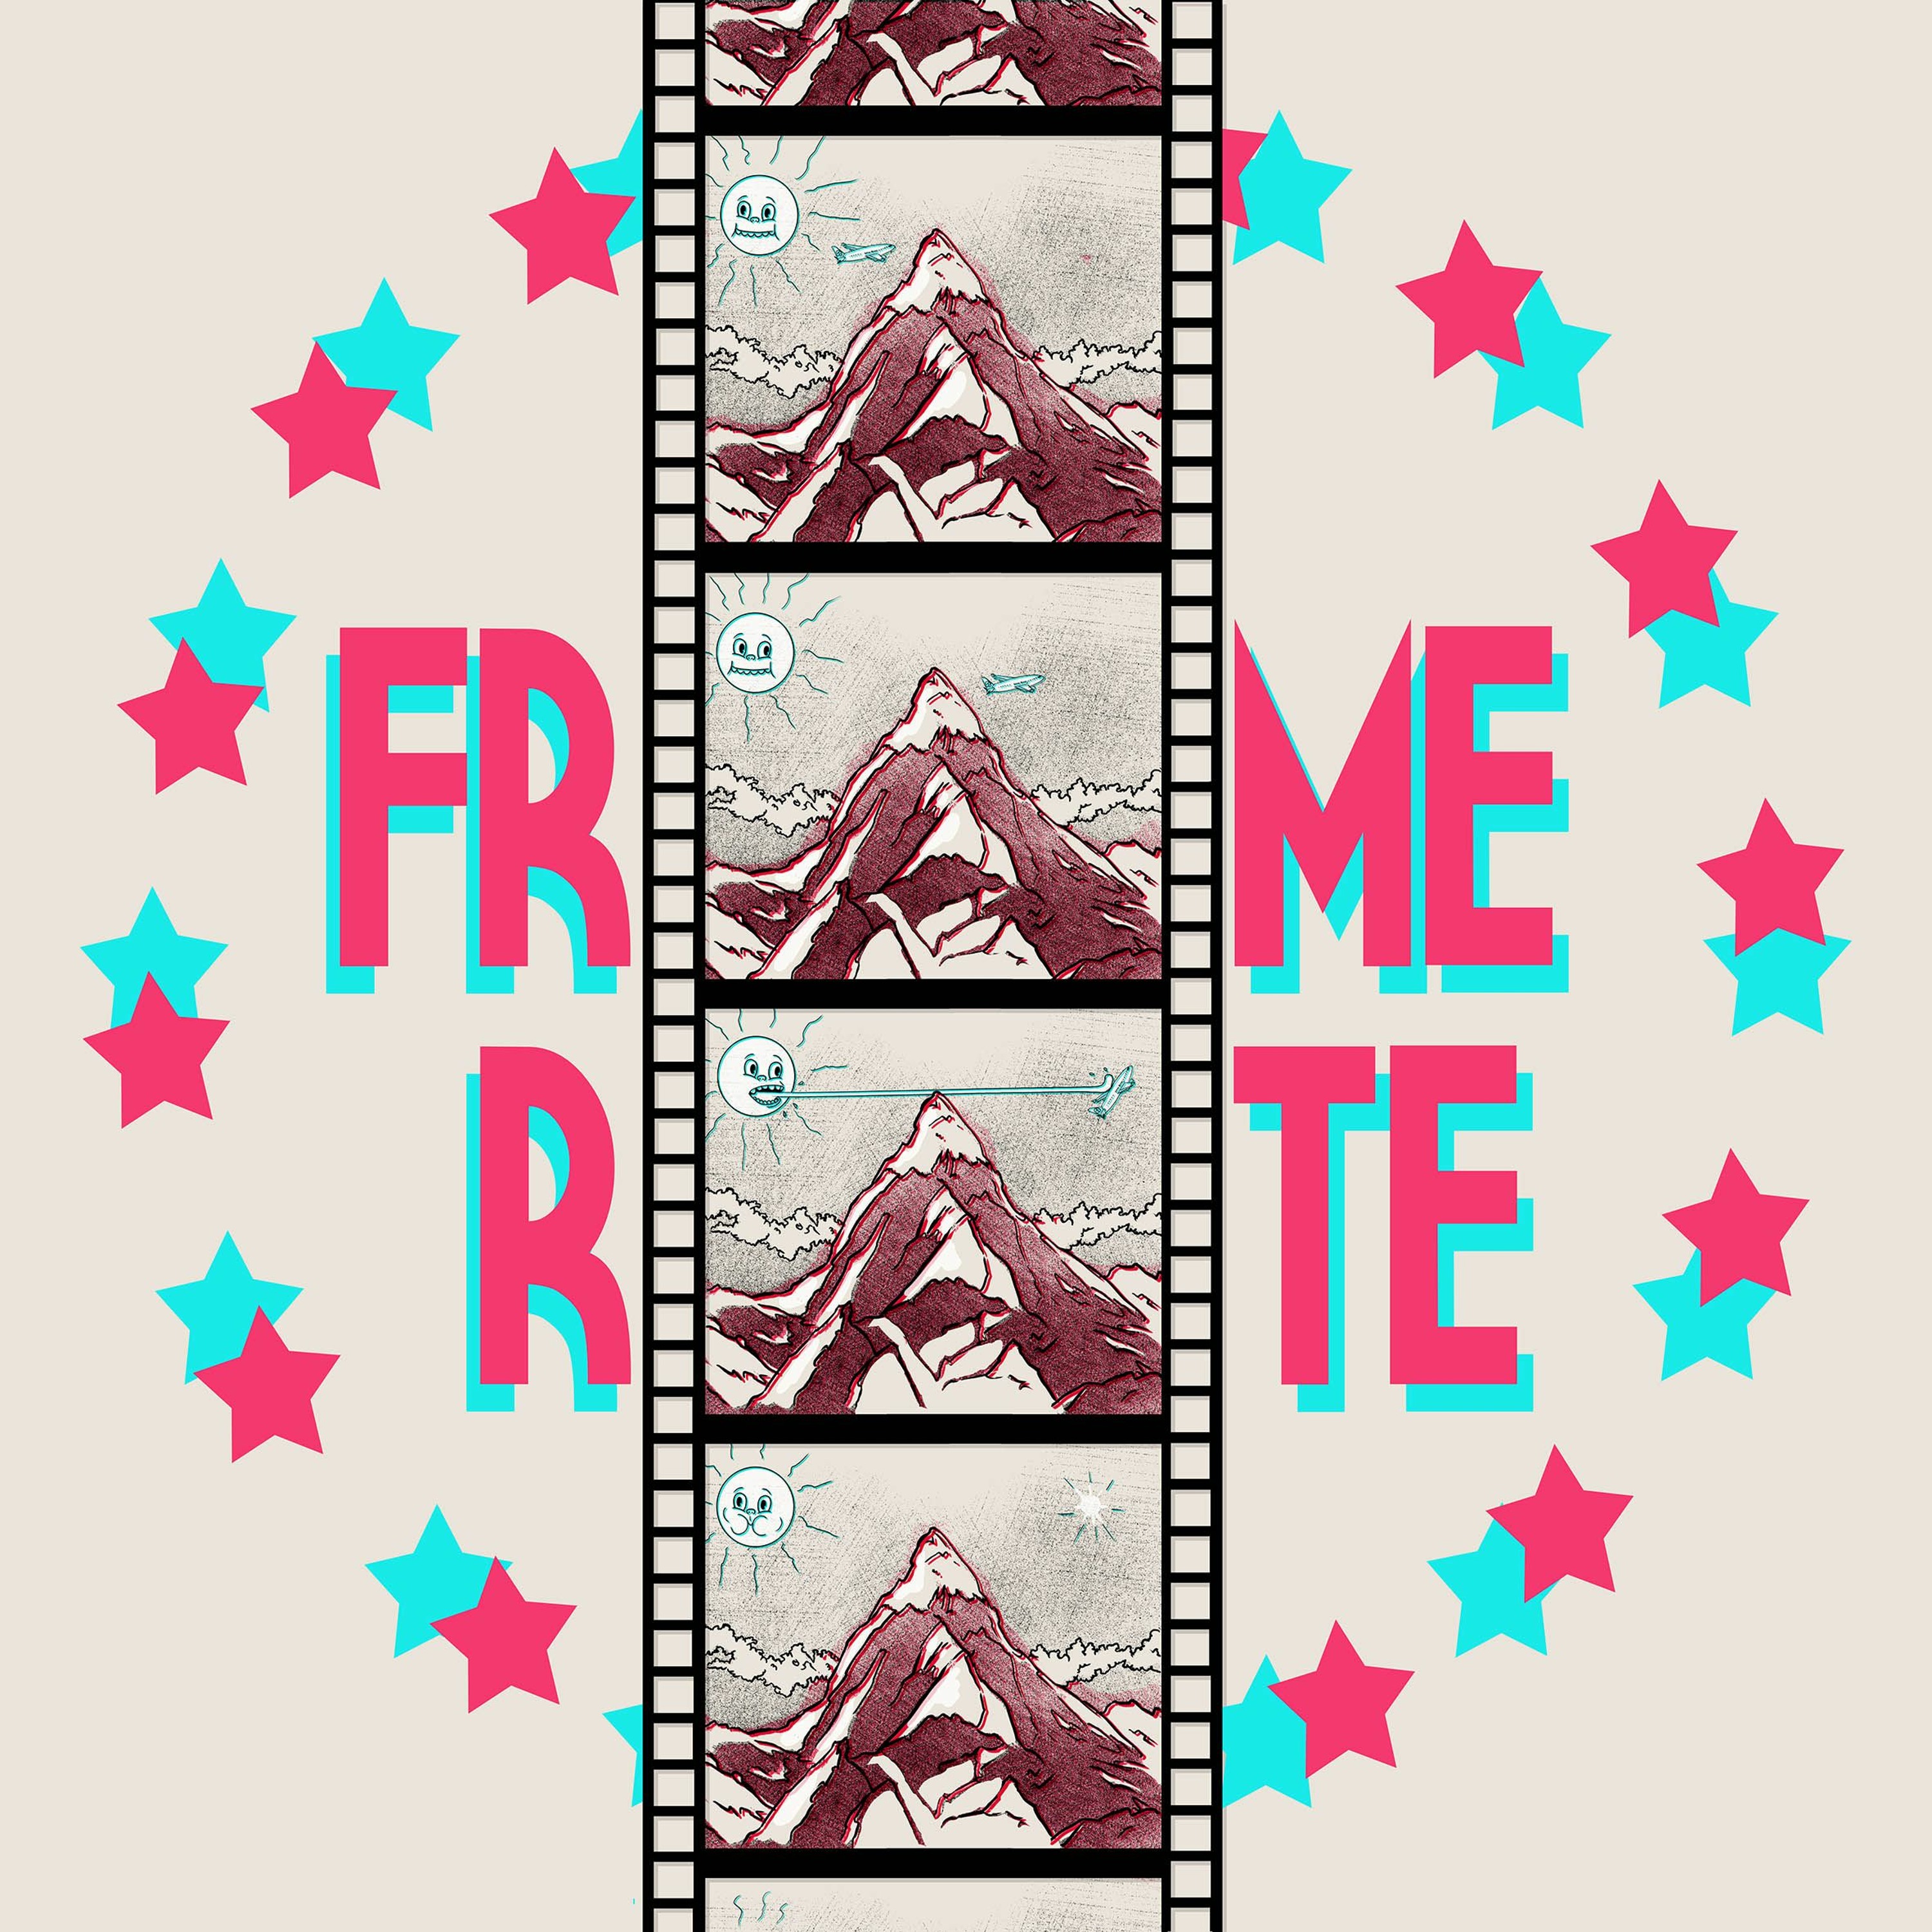 663. Frame Rate: Wake In Fright (Feat. Vanessa Guerrero)